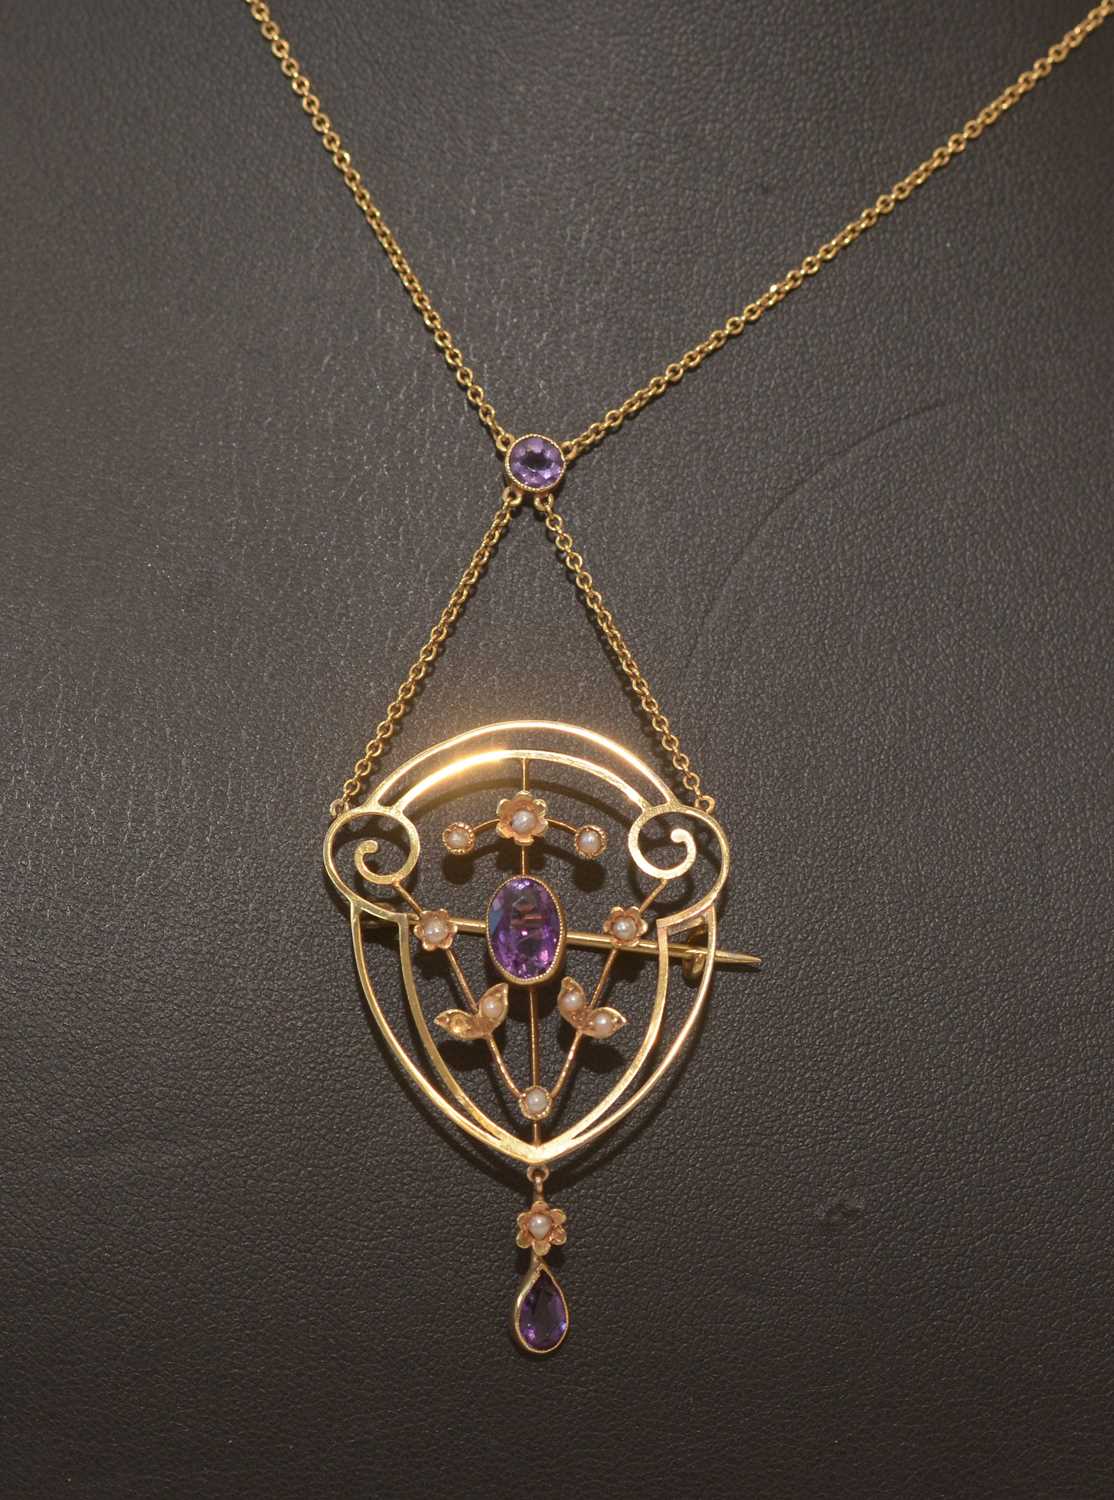 Lot 161 - Edwardian amethyst and seed pearl pendant